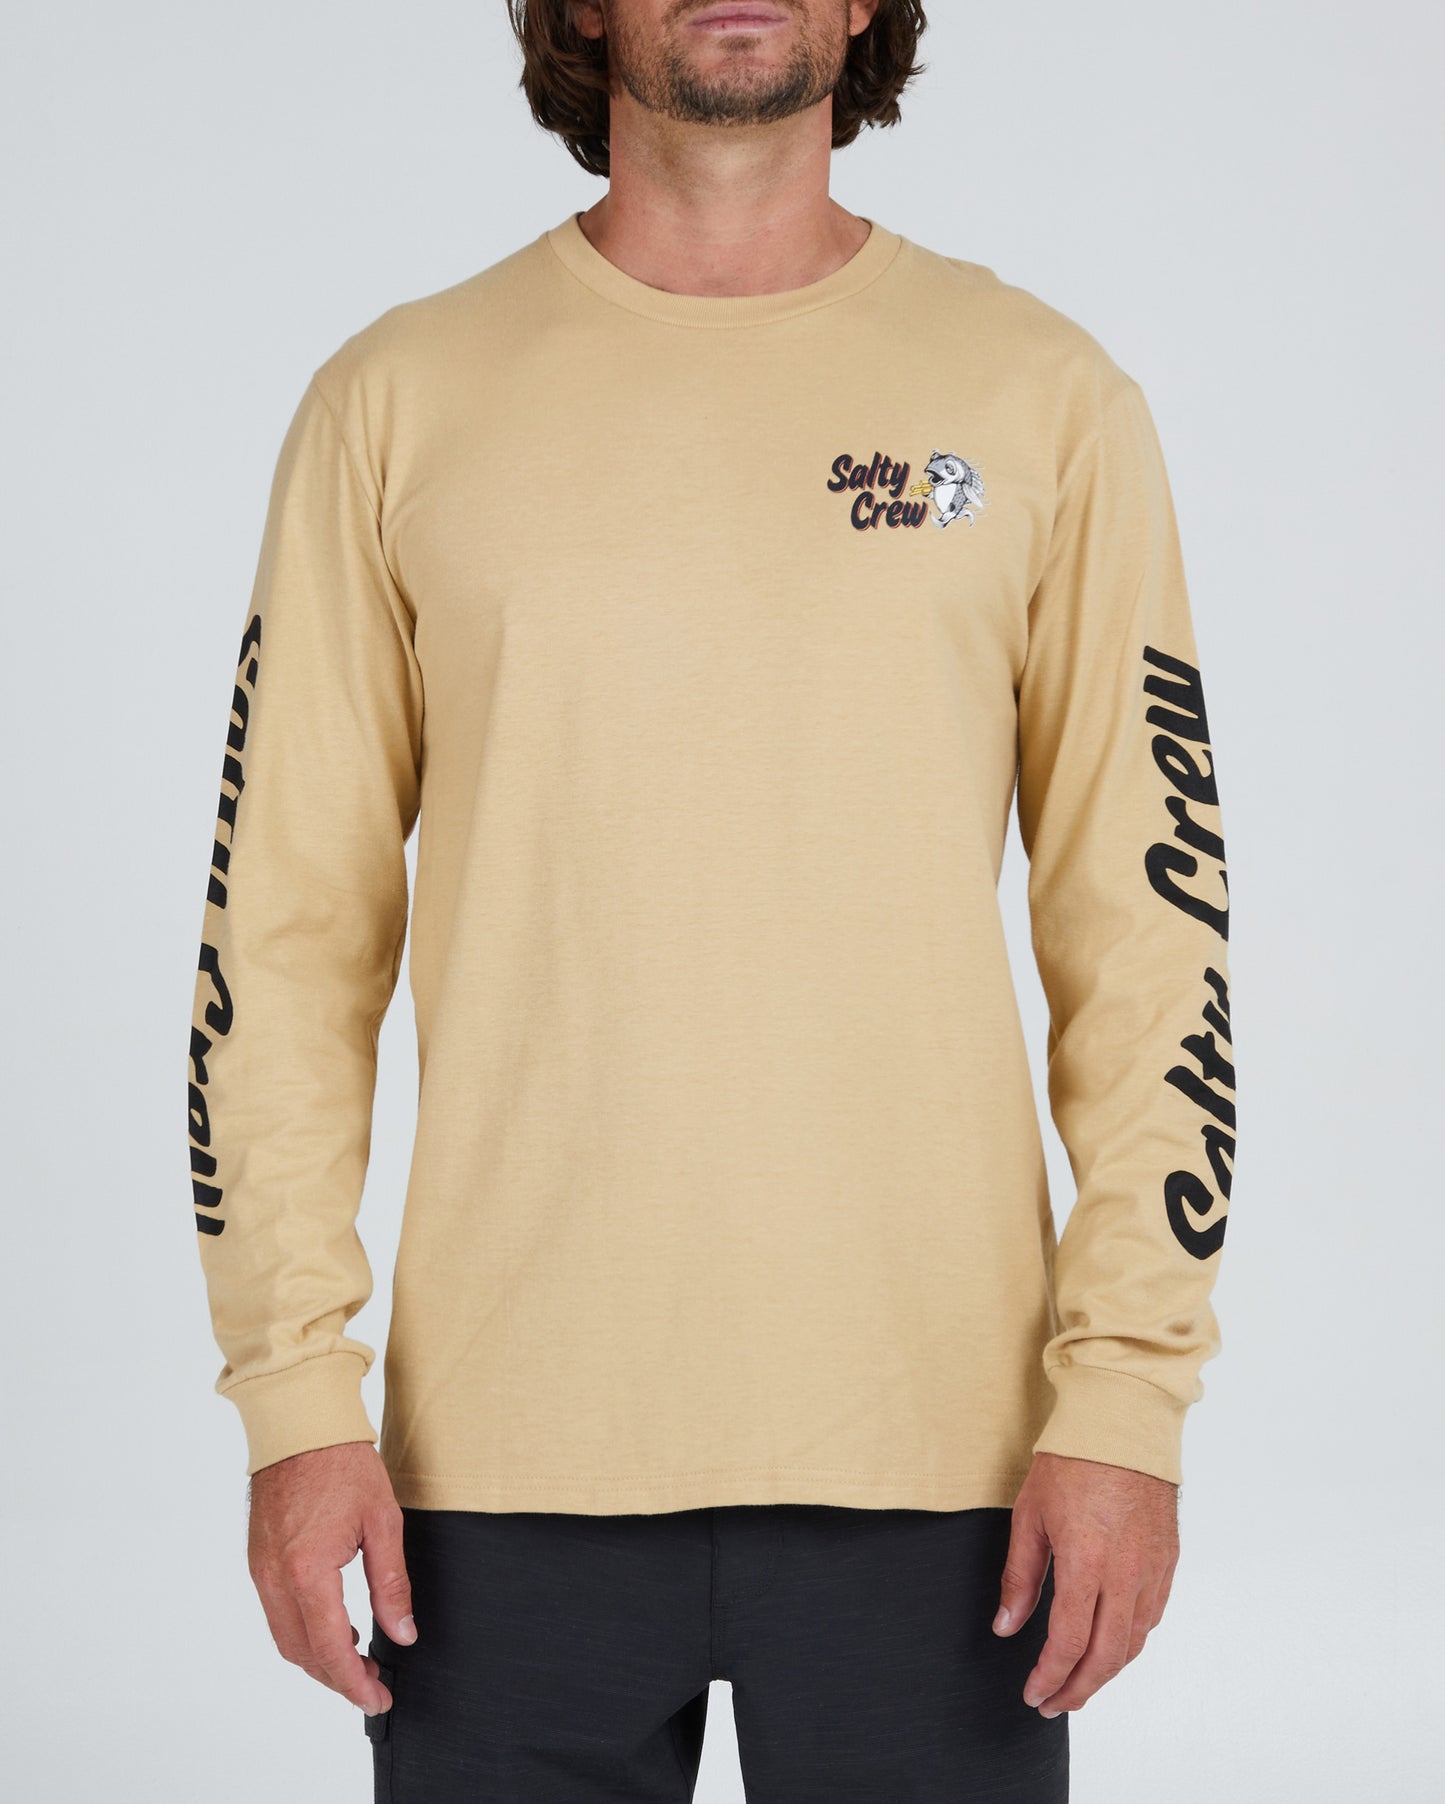 On body front of the Fish And Chips Camel L/S Premium Tee